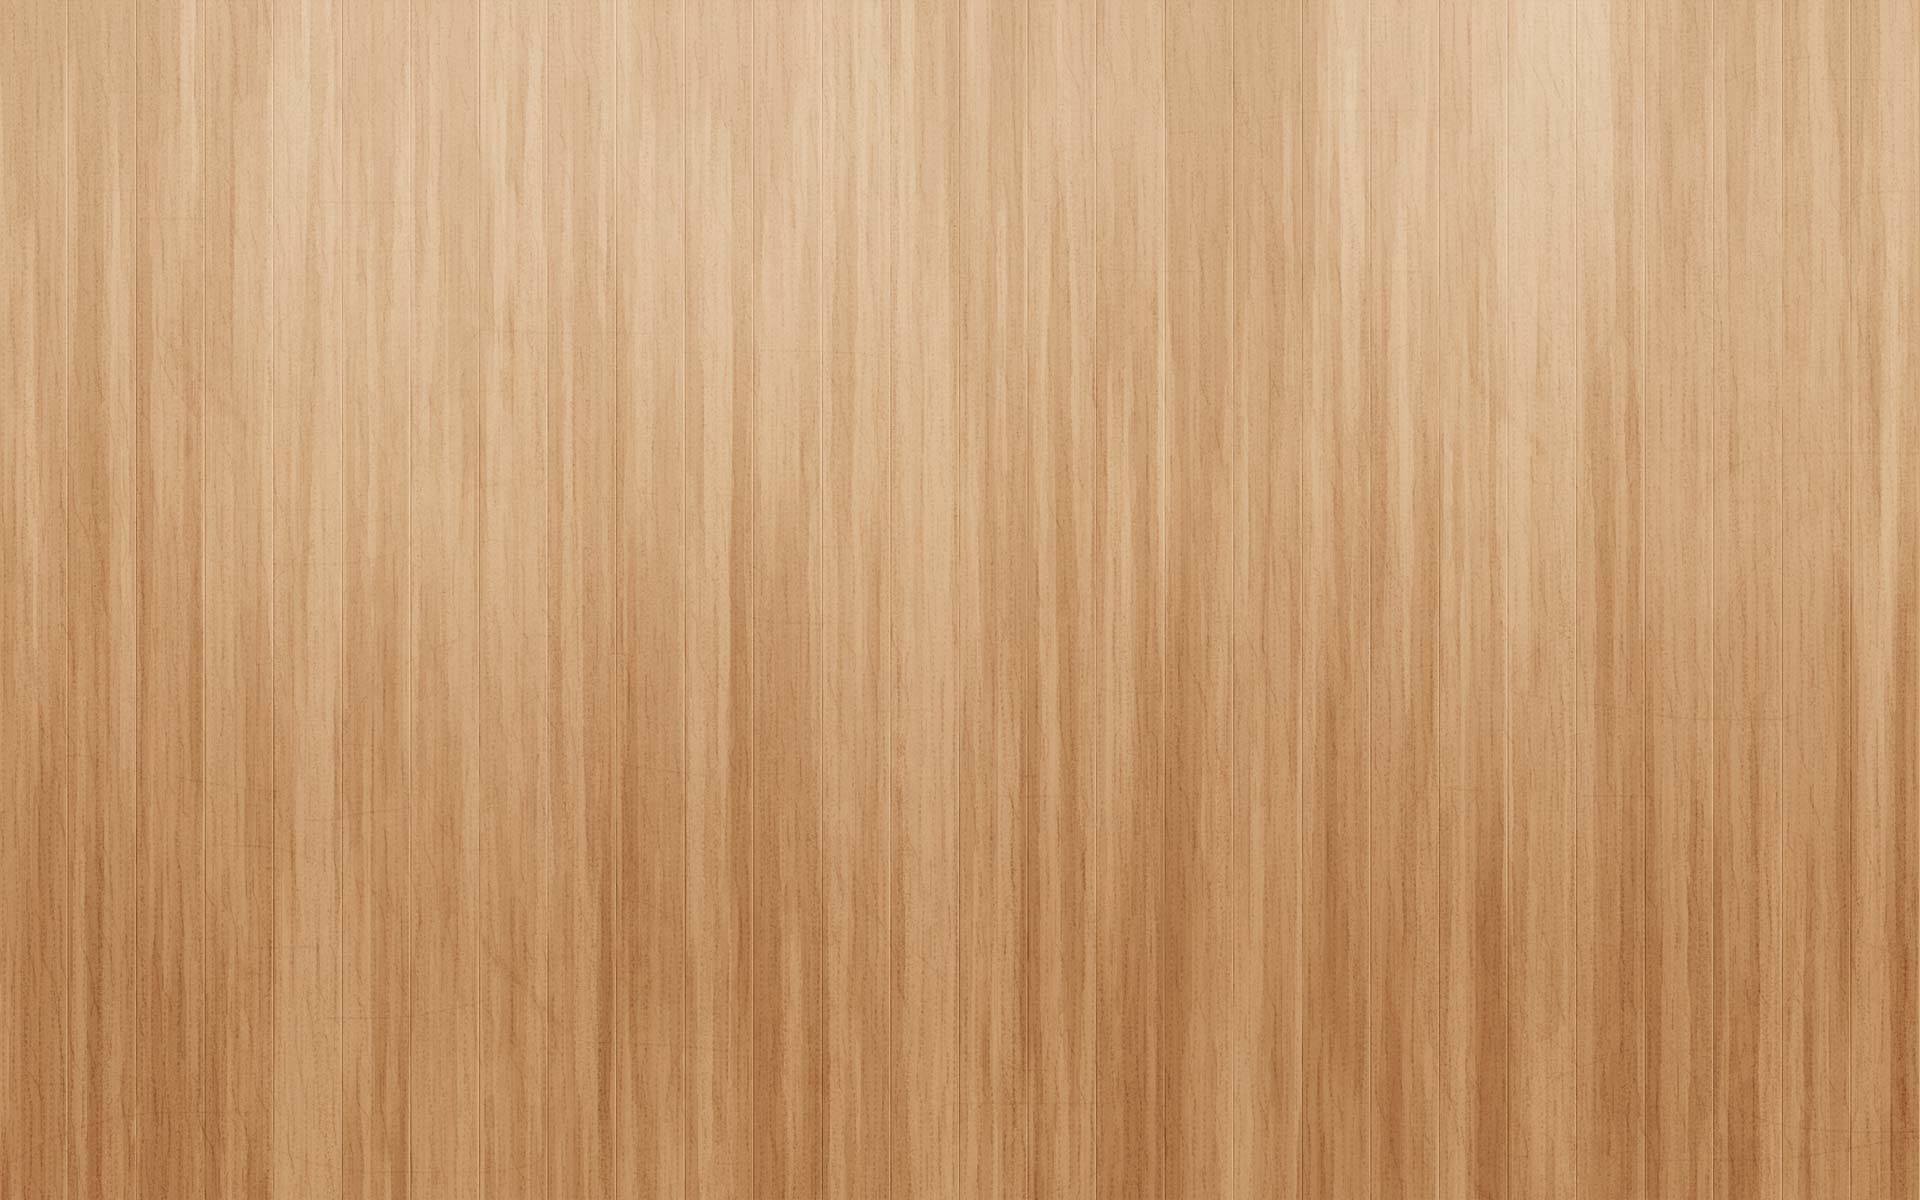 1920x1200 ... Light Wood Background And Repeating Light Wood Background Light Wood ...